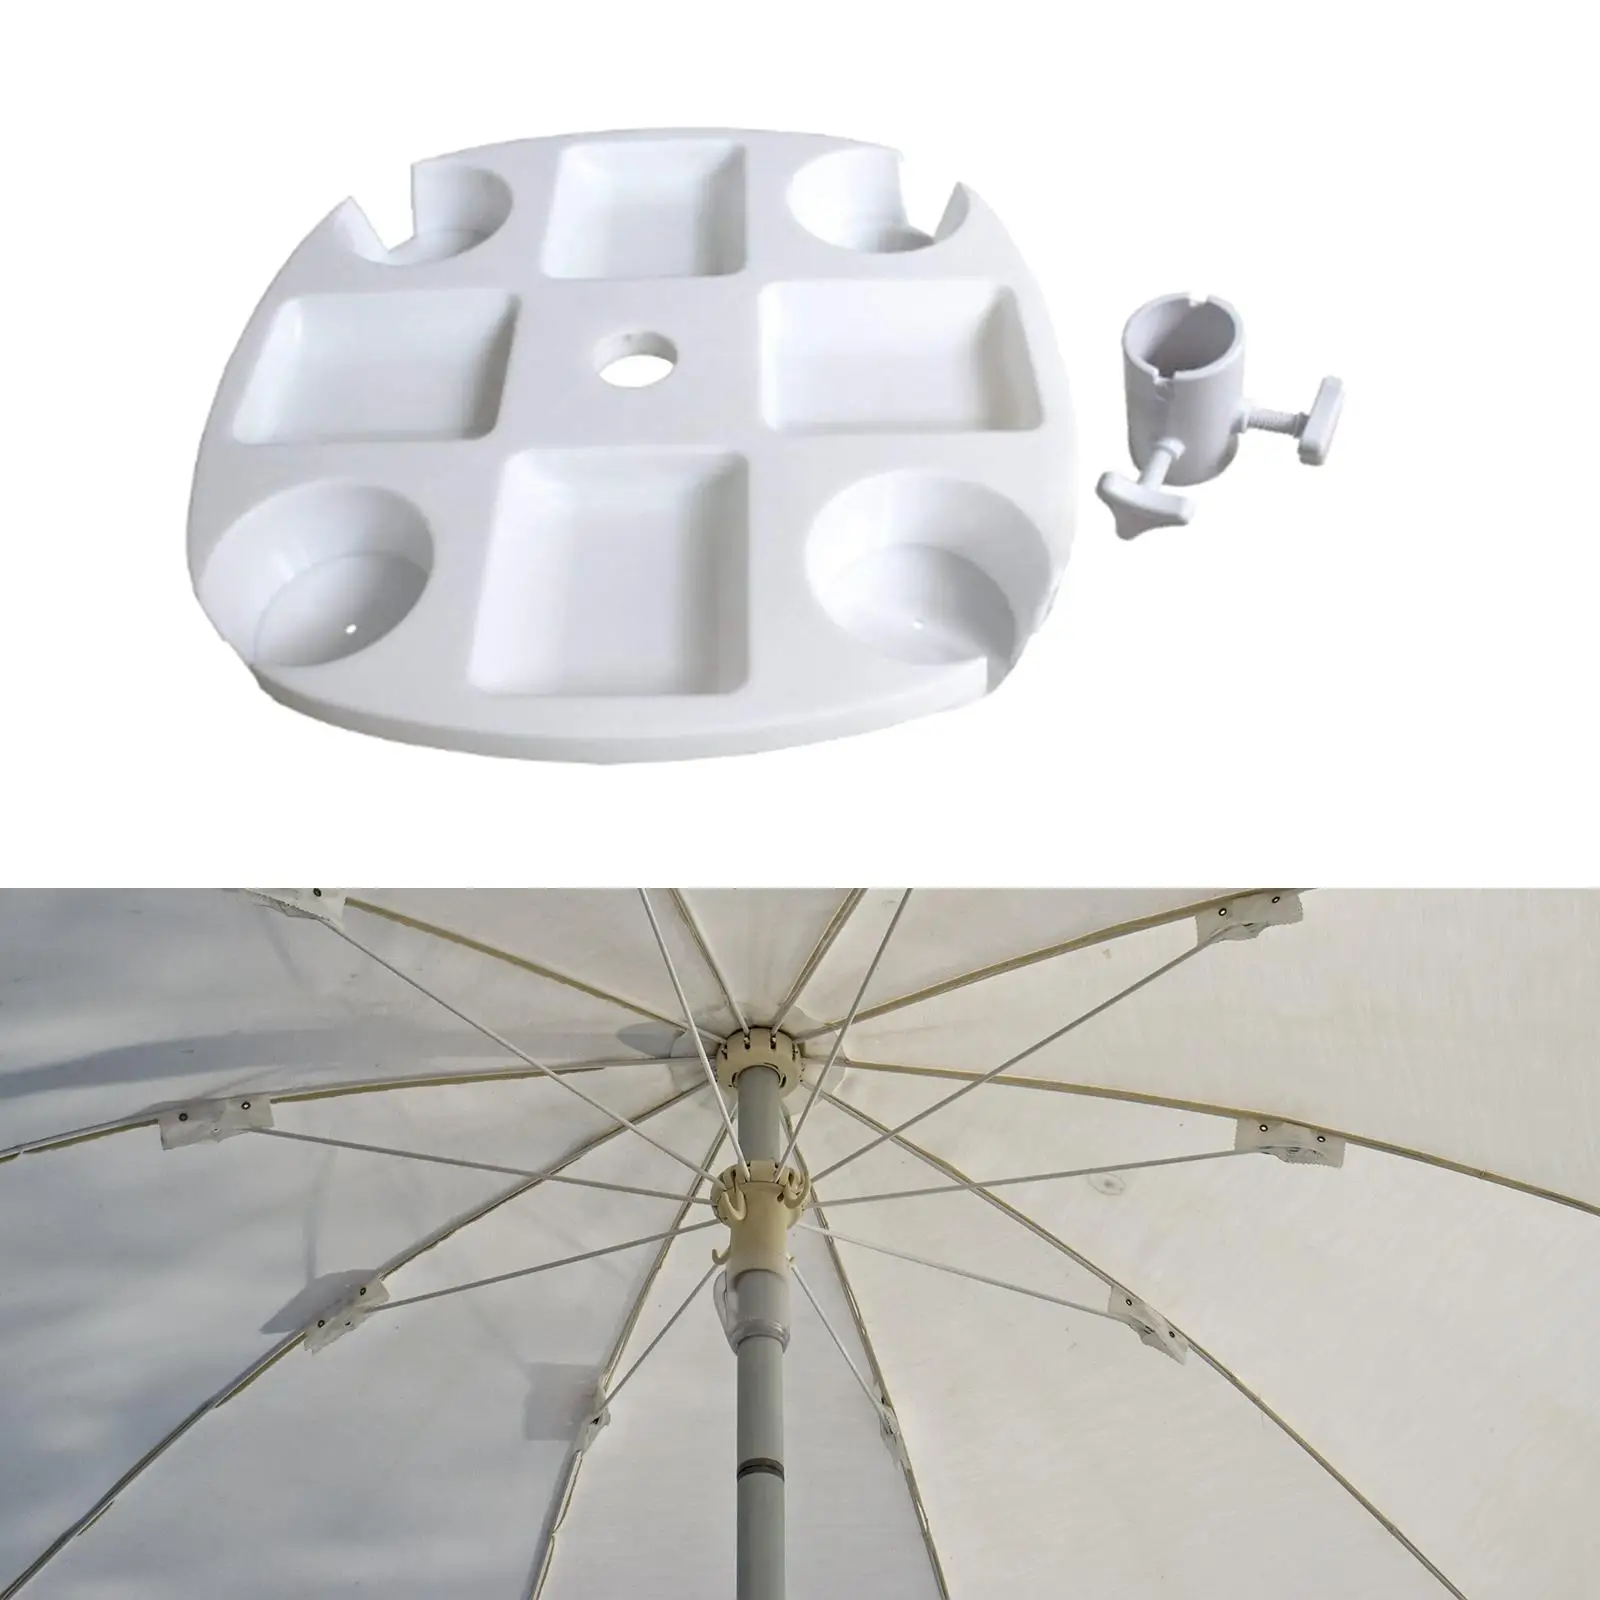 Outdoor Beach Umbrella  4 Snack Compartments Multifunctional Item Storage Tray Cup Holders 